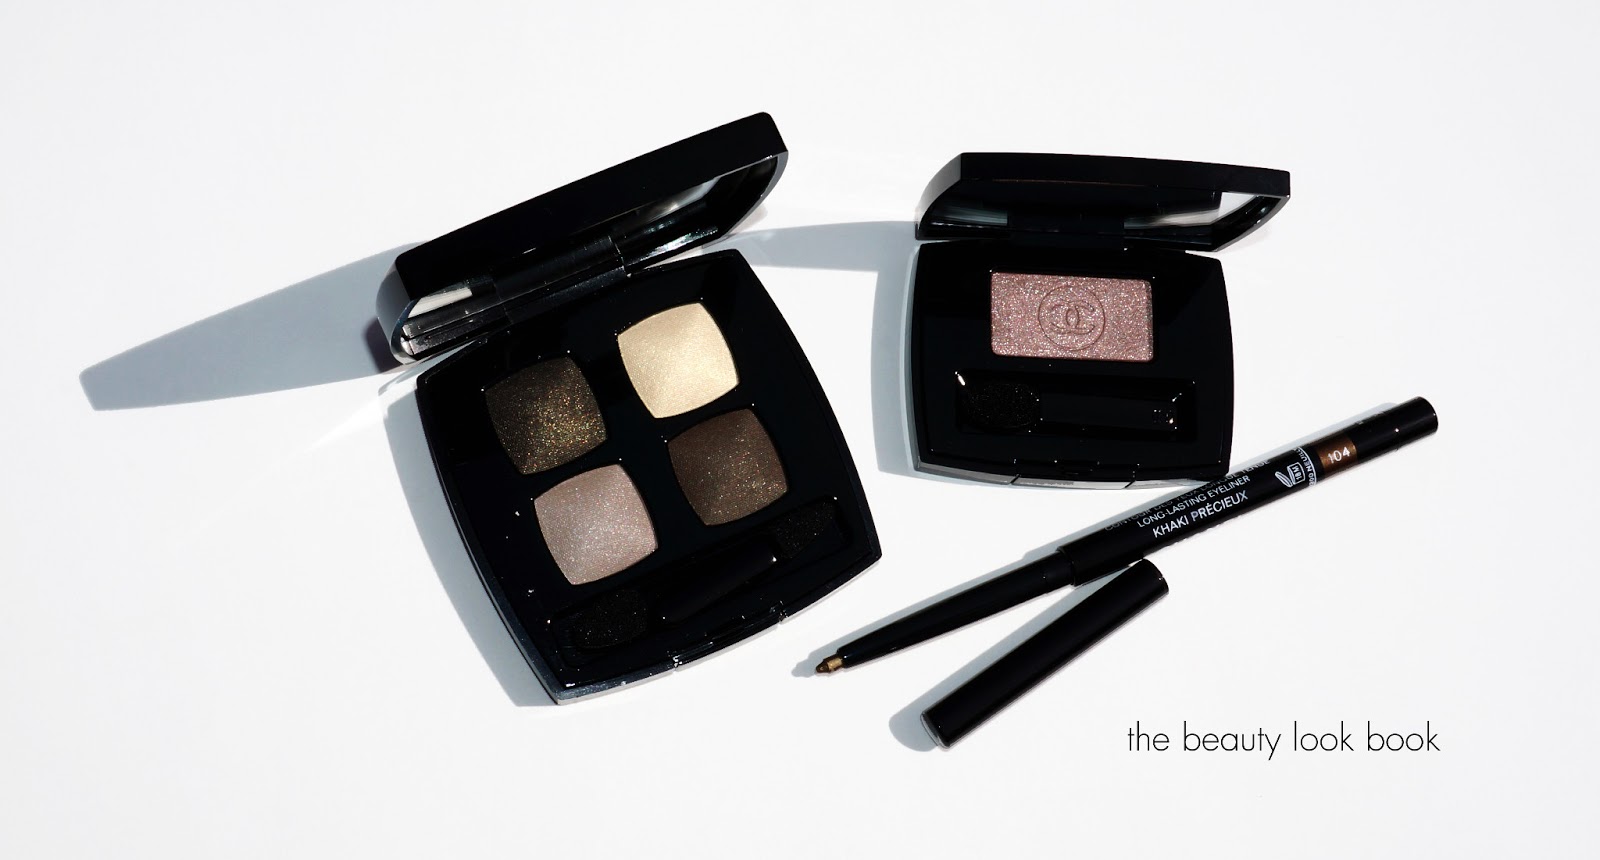 Chanel Archives - Page 11 of 84 - The Beauty Look Book